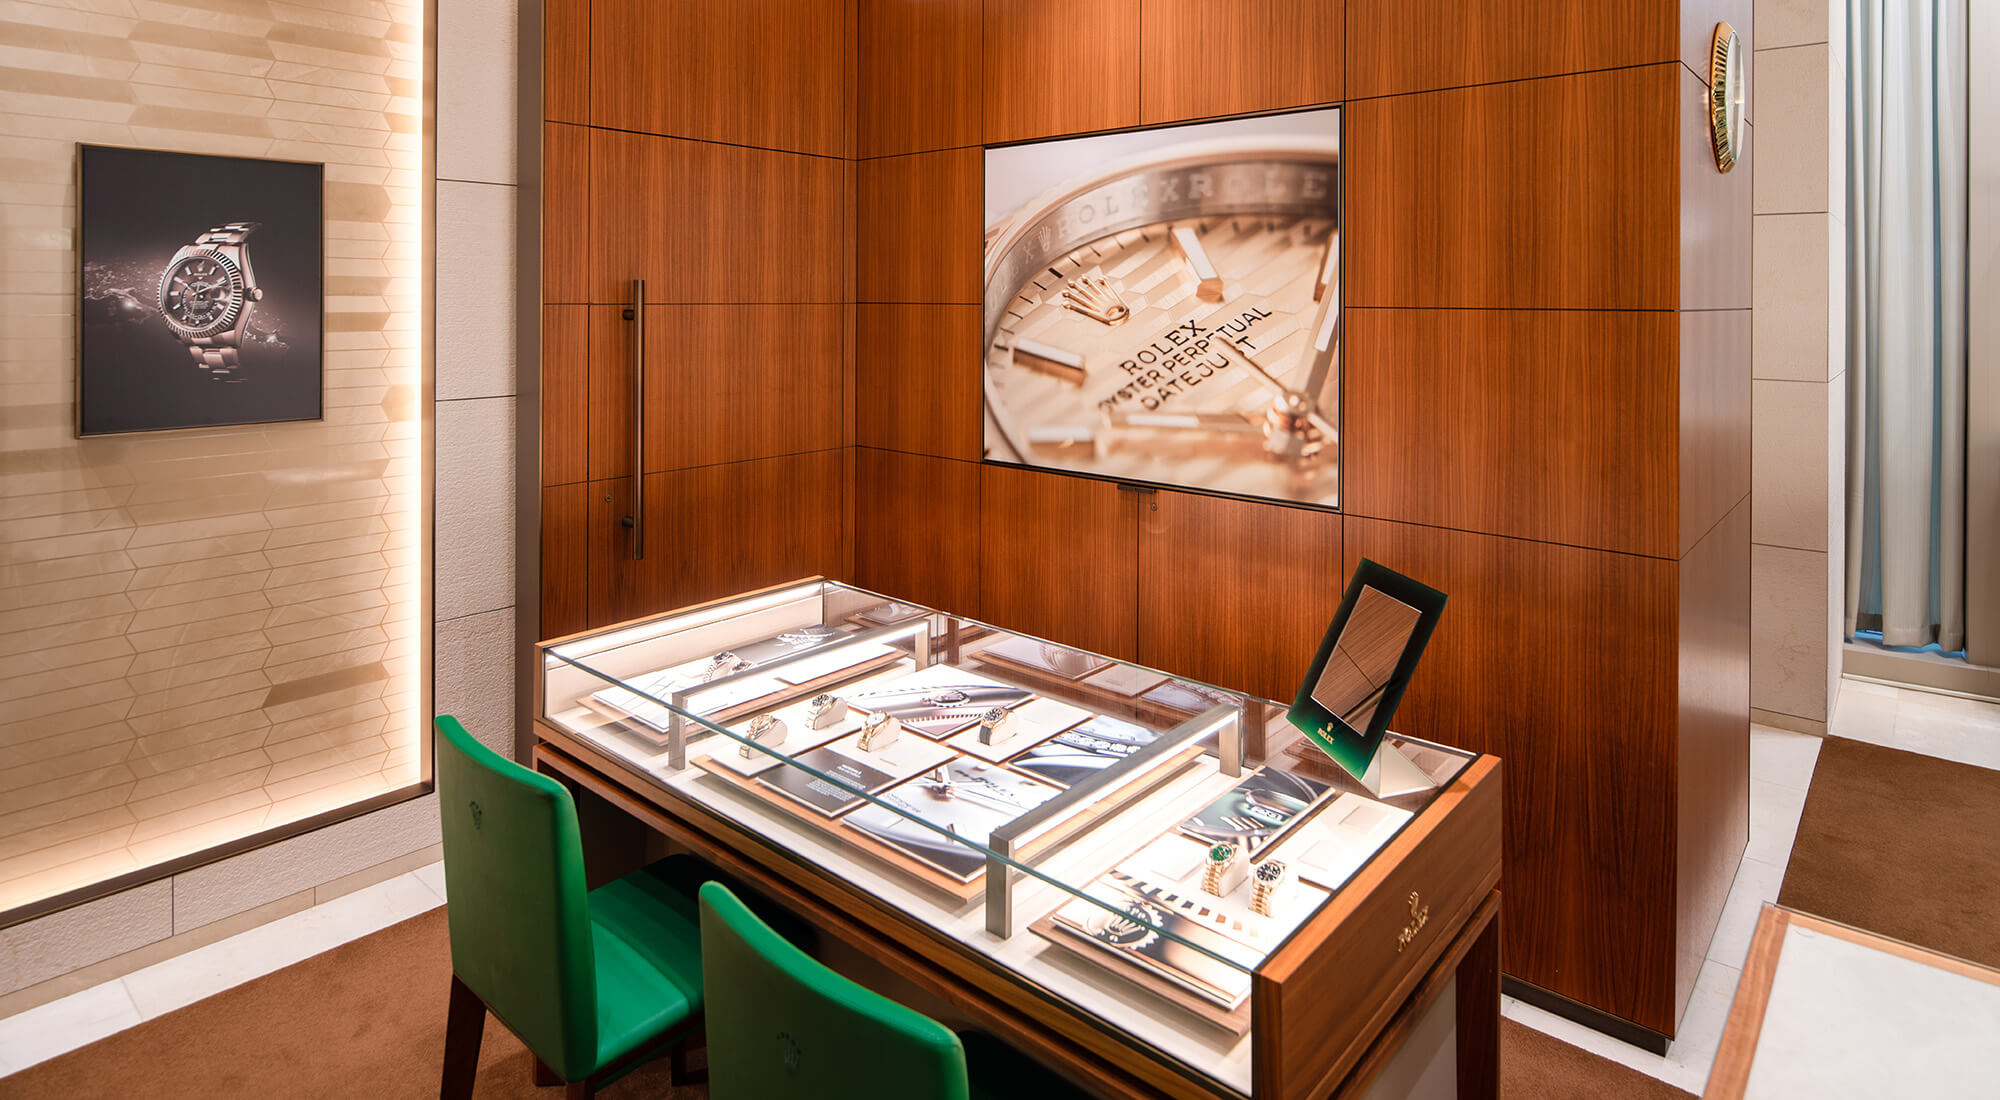 discover our luxury rolex showroom - global watch company